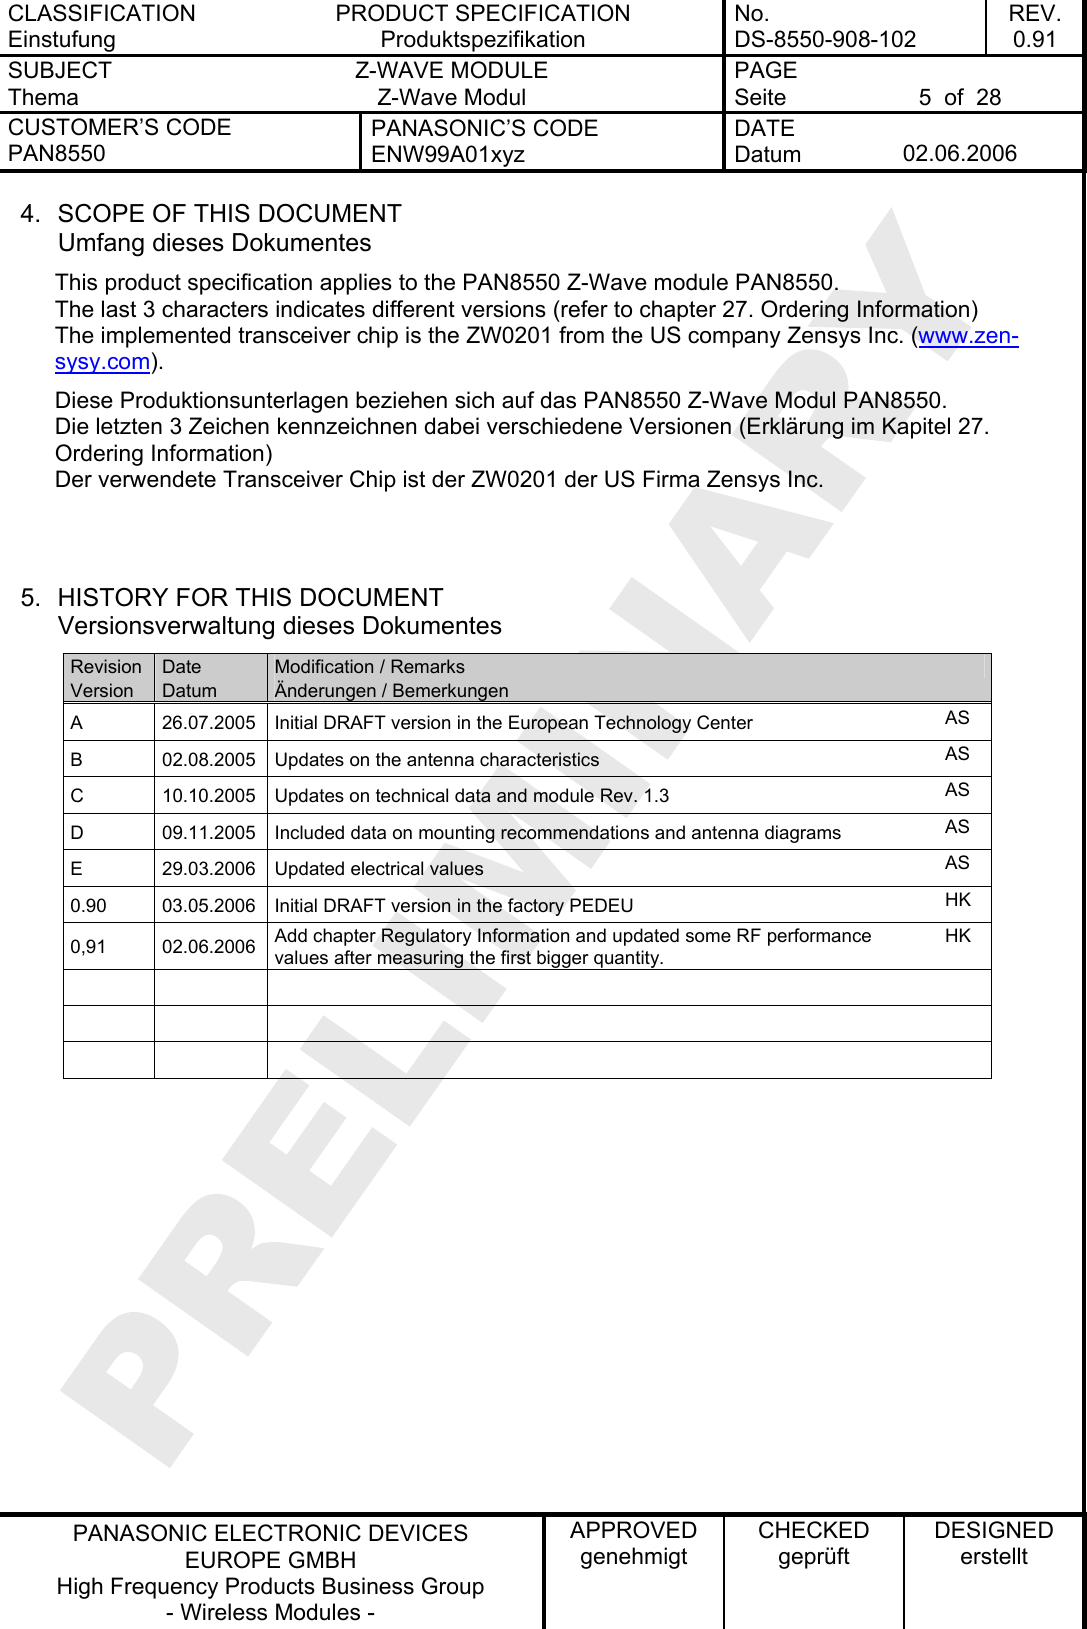 CLASSIFICATION Einstufung PRODUCT SPECIFICATION Produktspezifikation No. DS-8550-908-102 REV. 0.91 SUBJECT Thema Z-WAVE MODULE Z-Wave Modul PAGE Seite  5  of  28 CUSTOMER’S CODE PAN8550 PANASONIC’S CODE ENW99A01xyz DATE Datum  02.06.2006   PANASONIC ELECTRONIC DEVICES EUROPE GMBH High Frequency Products Business Group - Wireless Modules - APPROVED genehmigt CHECKED geprüft DESIGNED erstellt 4.  SCOPE OF THIS DOCUMENT Umfang dieses Dokumentes This product specification applies to the PAN8550 Z-Wave module PAN8550. The last 3 characters indicates different versions (refer to chapter 27. Ordering Information) The implemented transceiver chip is the ZW0201 from the US company Zensys Inc. (www.zen-sysy.com). Diese Produktionsunterlagen beziehen sich auf das PAN8550 Z-Wave Modul PAN8550. Die letzten 3 Zeichen kennzeichnen dabei verschiedene Versionen (Erklärung im Kapitel 27. Ordering Information) Der verwendete Transceiver Chip ist der ZW0201 der US Firma Zensys Inc.   5.  HISTORY FOR THIS DOCUMENT Versionsverwaltung dieses Dokumentes Revision Version Date Datum Modification / Remarks Änderungen / Bemerkungen  A  26.07.2005  Initial DRAFT version in the European Technology Center  AS B  02.08.2005  Updates on the antenna characteristics  AS C  10.10.2005  Updates on technical data and module Rev. 1.3  AS D  09.11.2005  Included data on mounting recommendations and antenna diagrams  AS E  29.03.2006  Updated electrical values  AS 0.90  03.05.2006  Initial DRAFT version in the factory PEDEU  HK 0,91 02.06.2006 Add chapter Regulatory Information and updated some RF performance values after measuring the first bigger quantity. HK                      